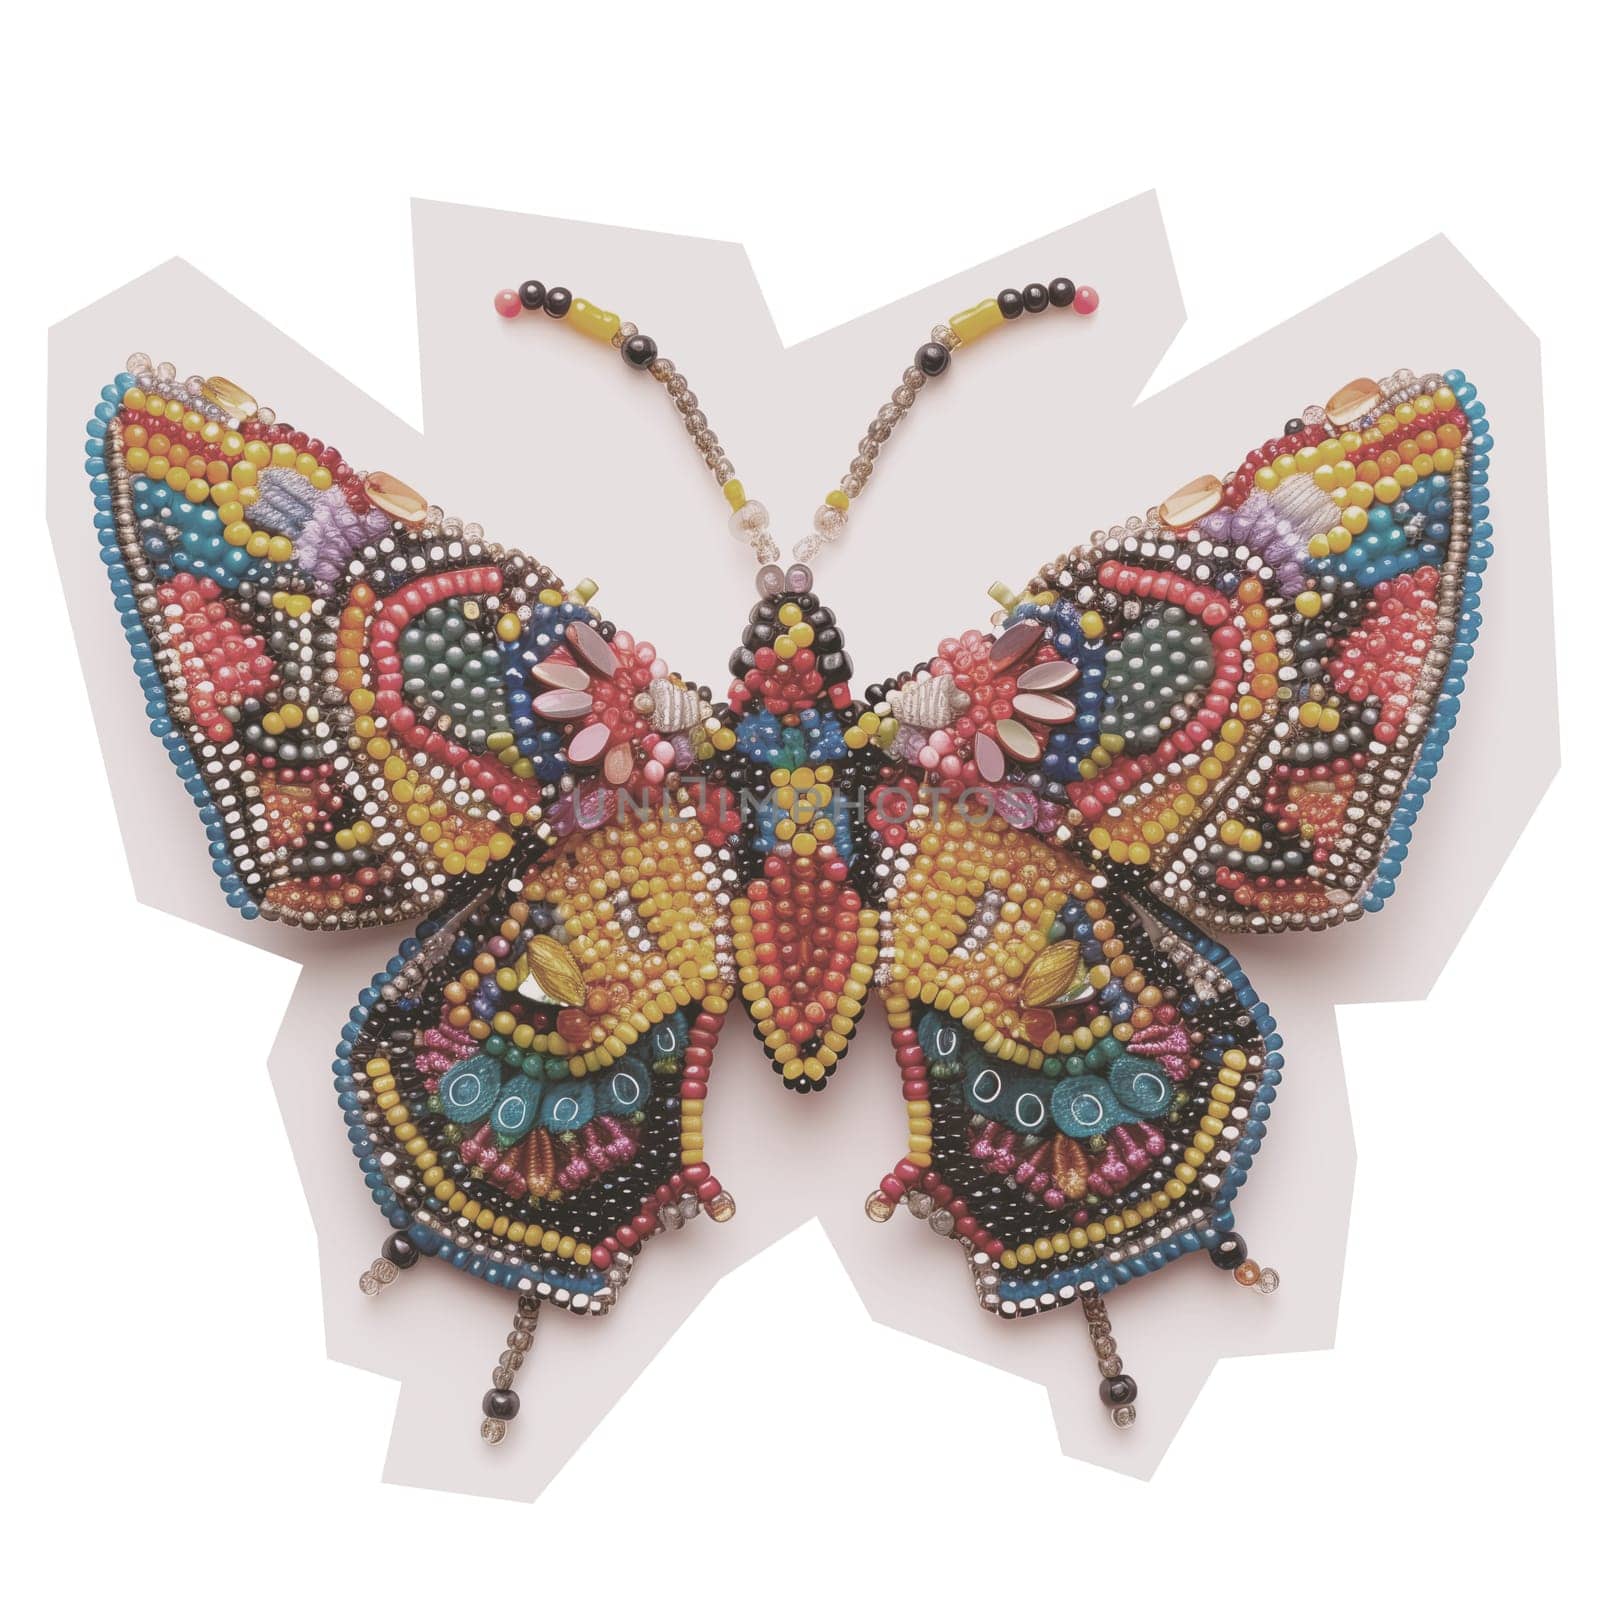 Decorative butterfly made of colored beads by Dustick